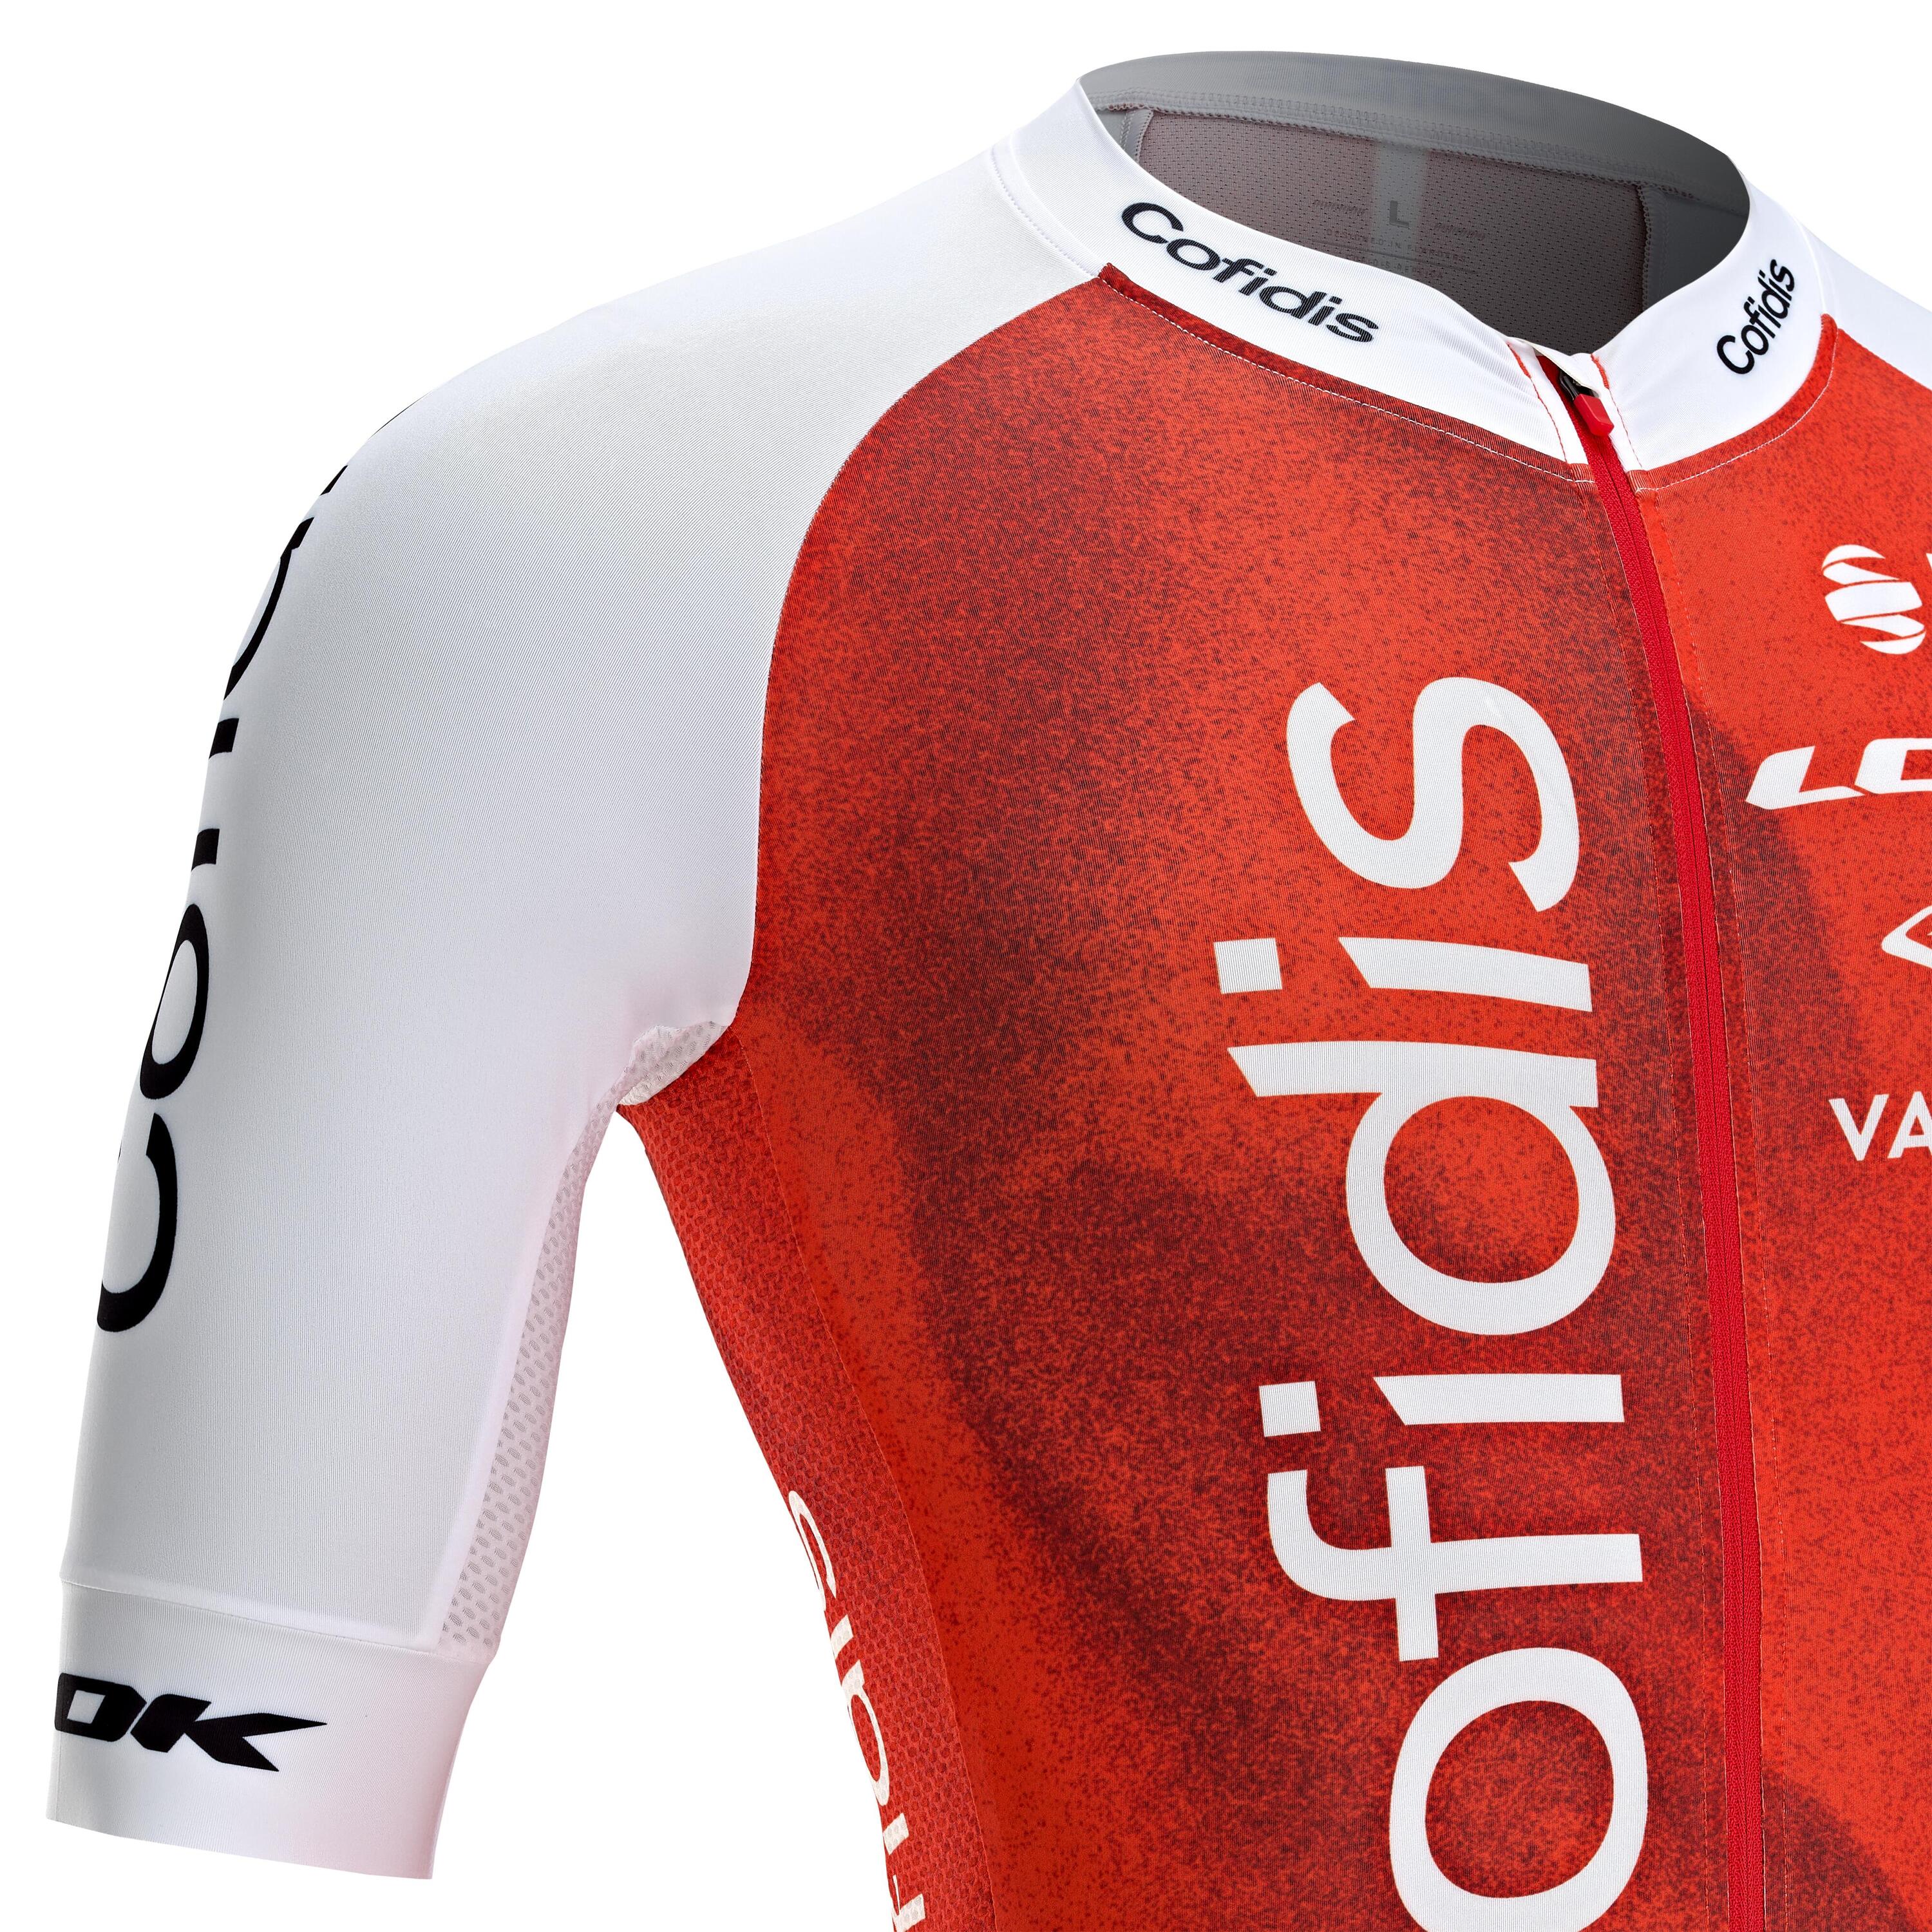 Road Cycling Jersey Racer - Cofidis 5/6